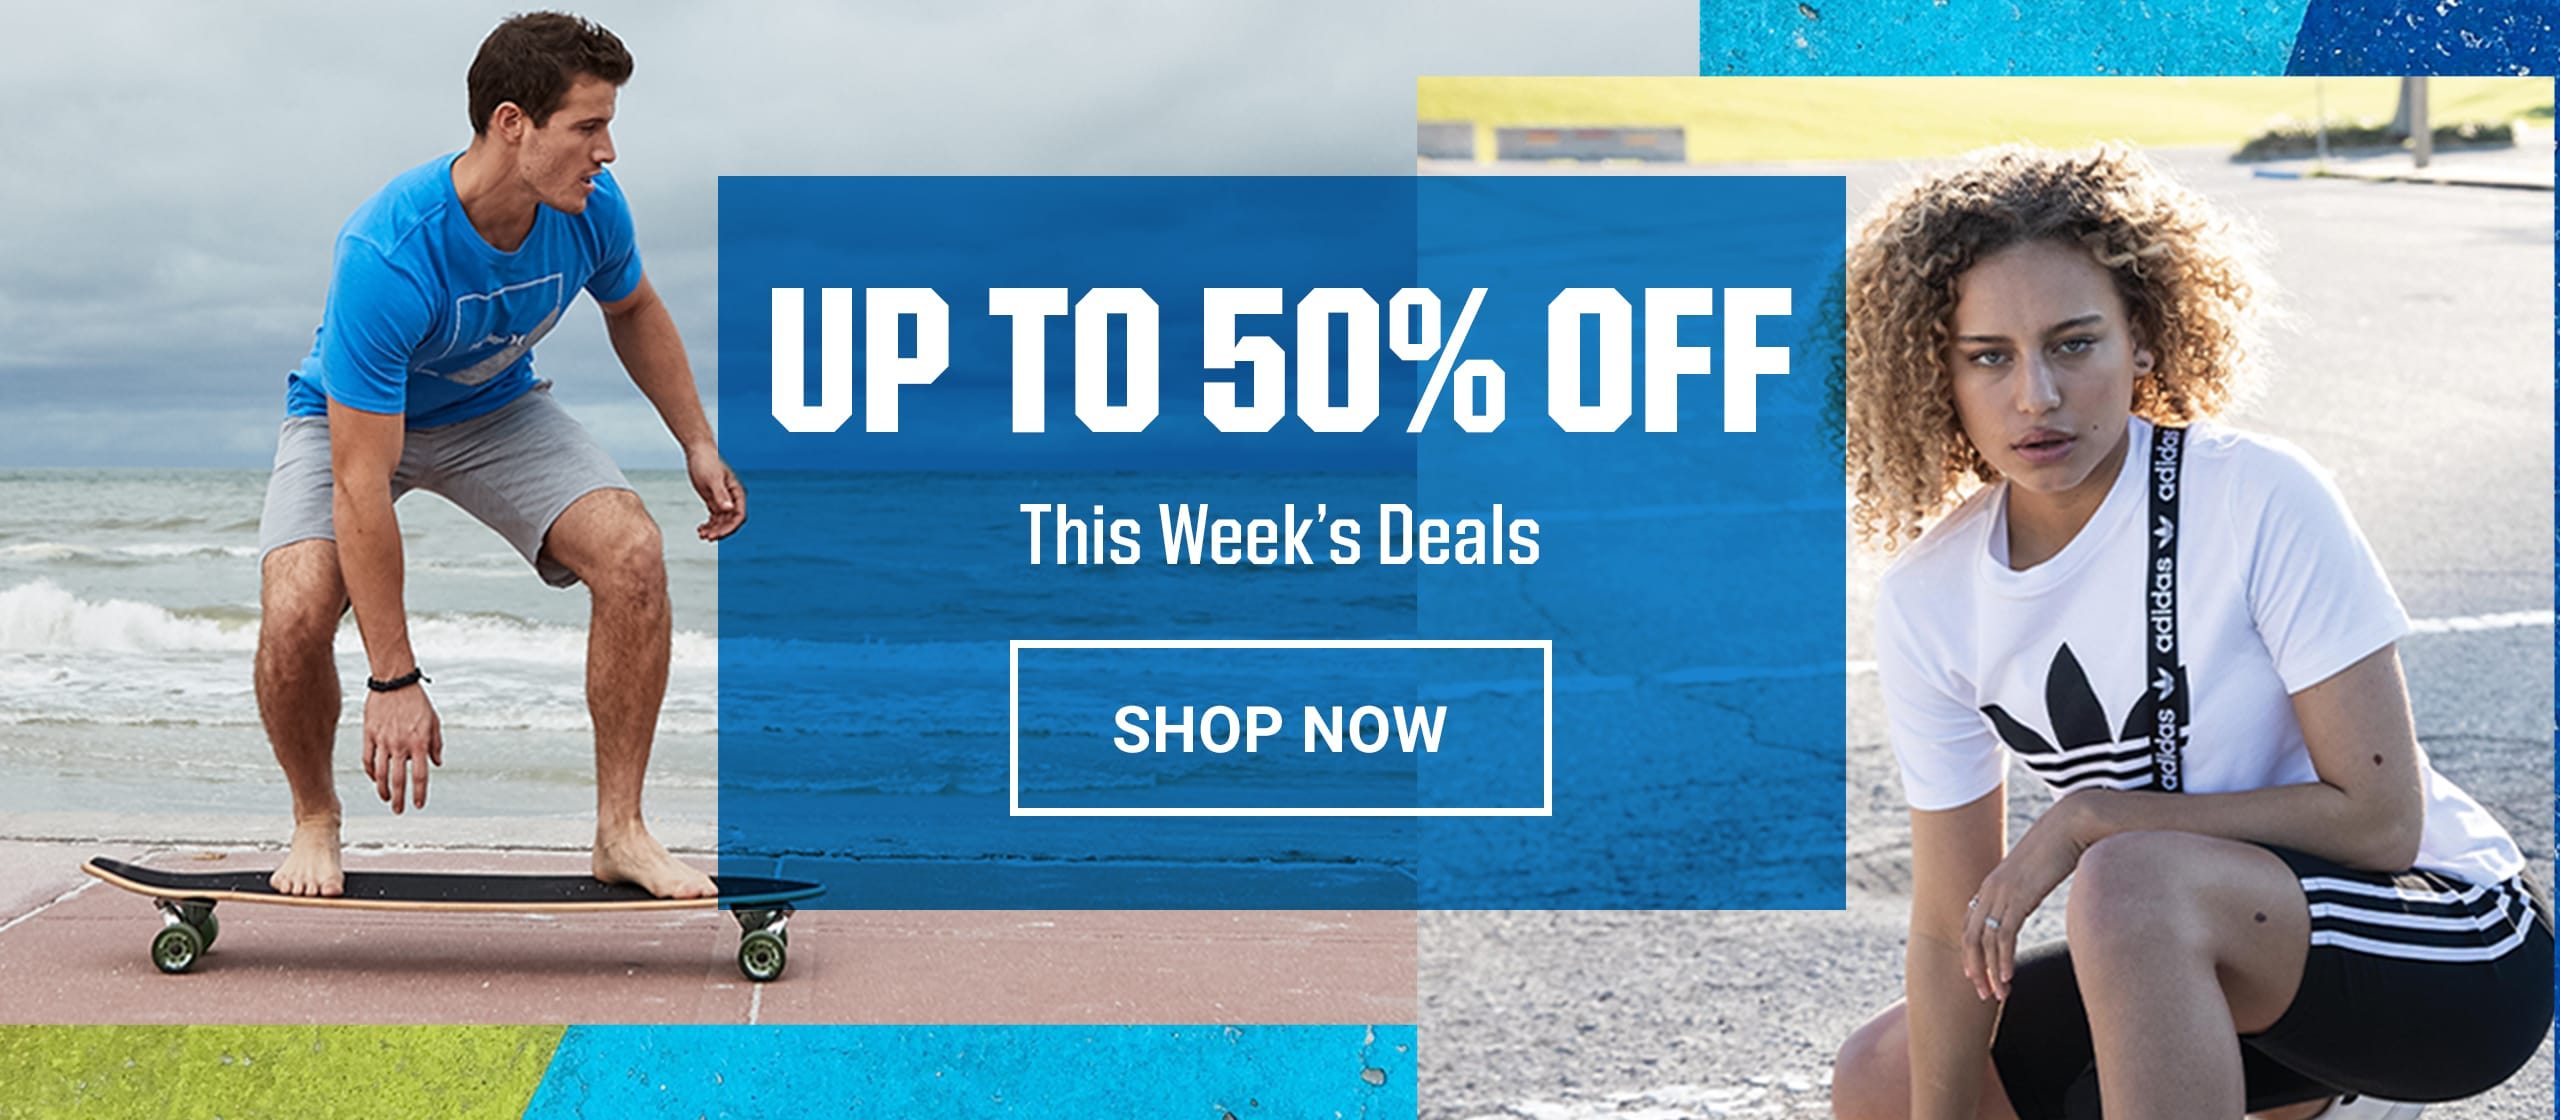 Take up to 50% off this week's deals. Shop now.